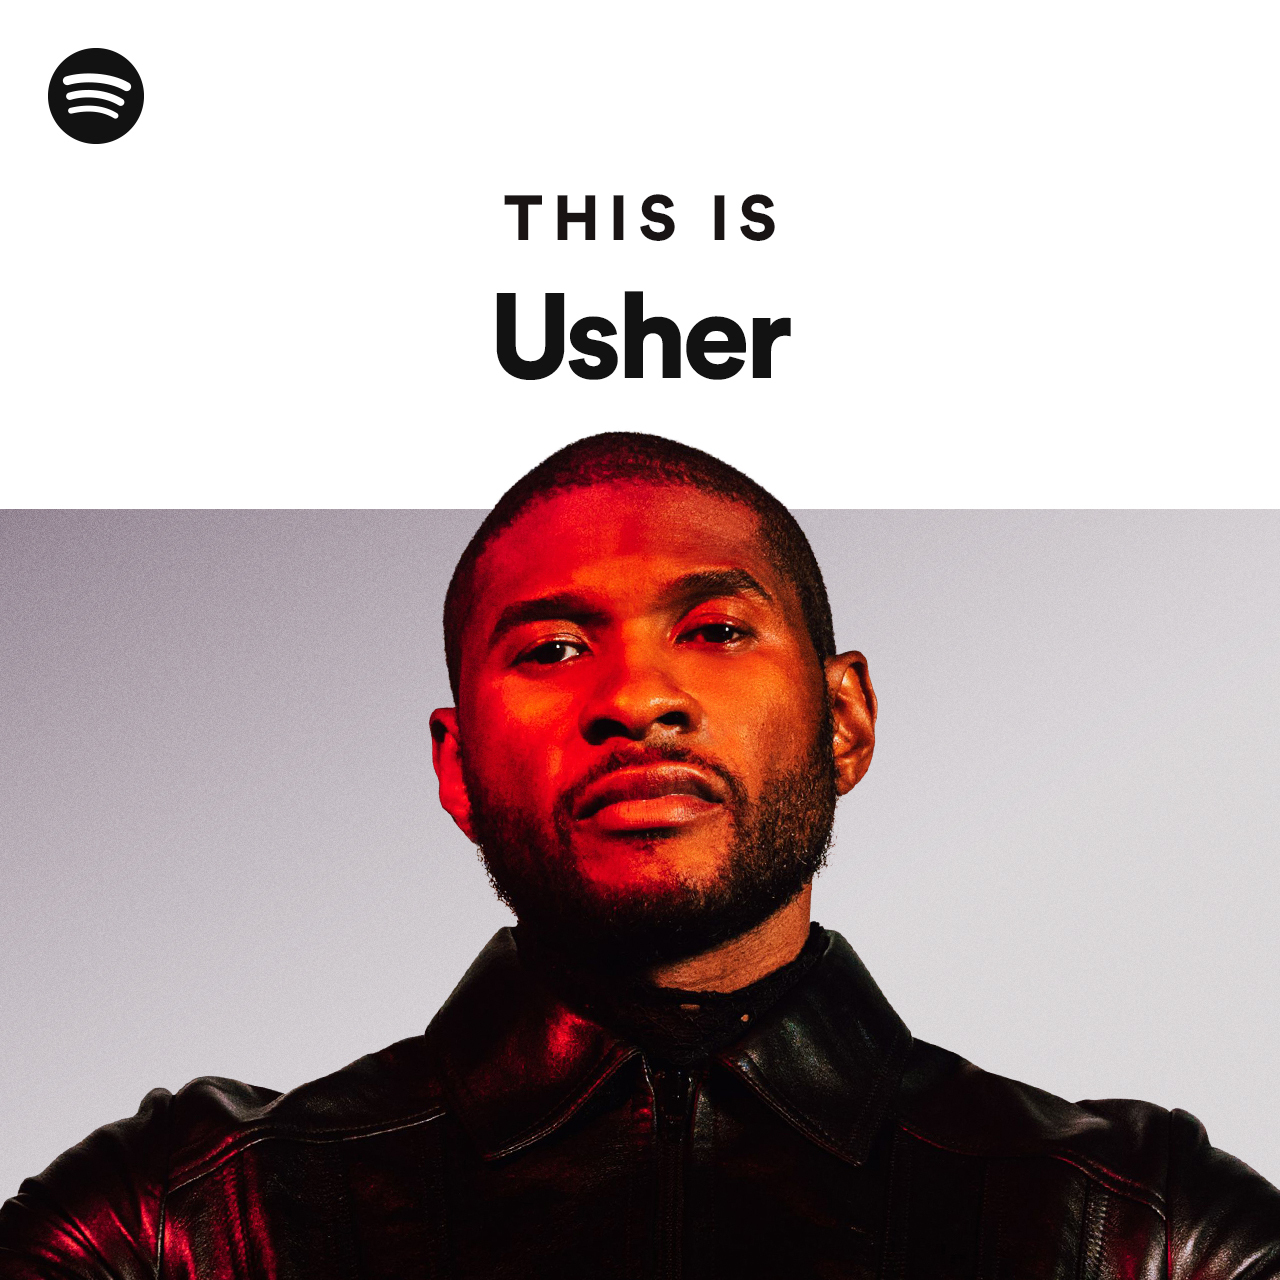 dont need no usher meaning